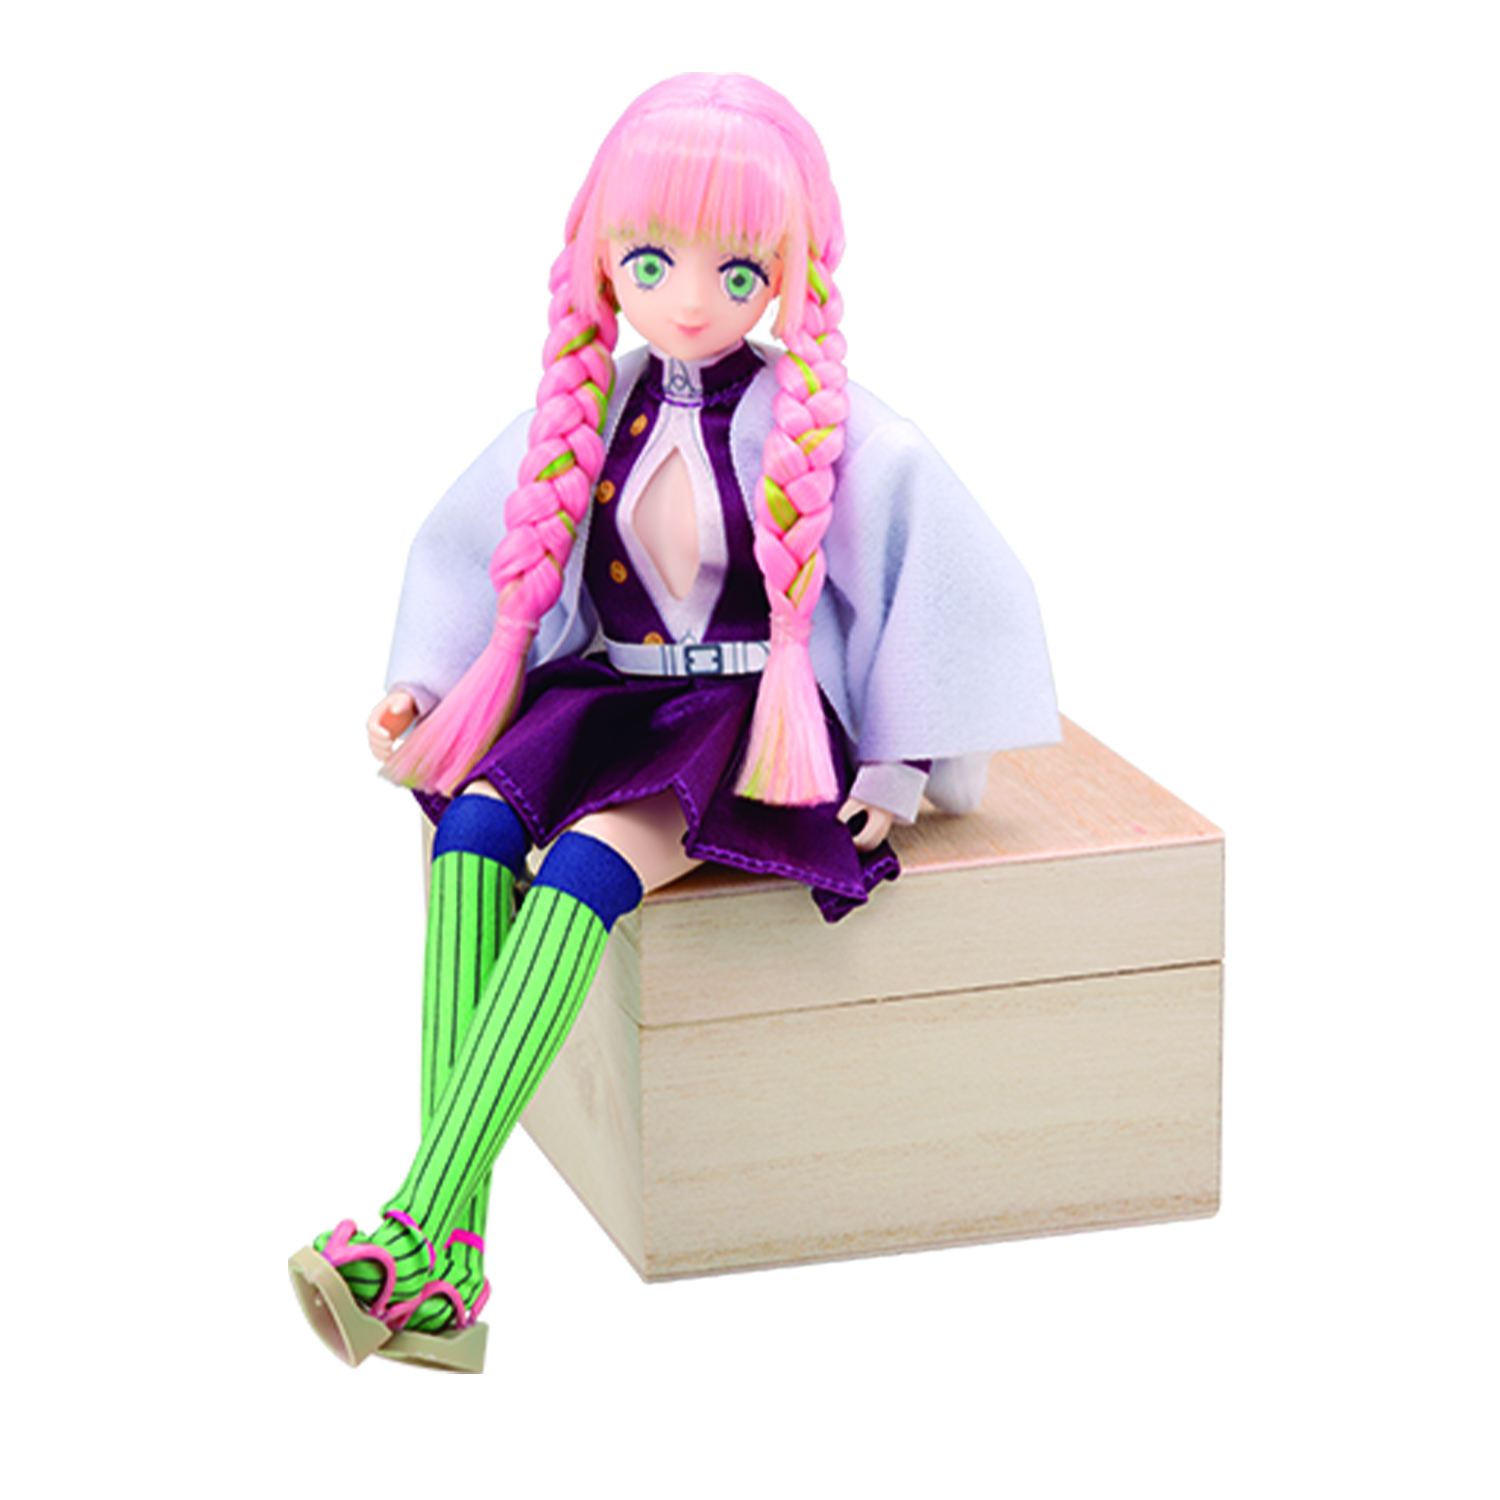 Shop Anime Dolls Girls with great discounts and prices online